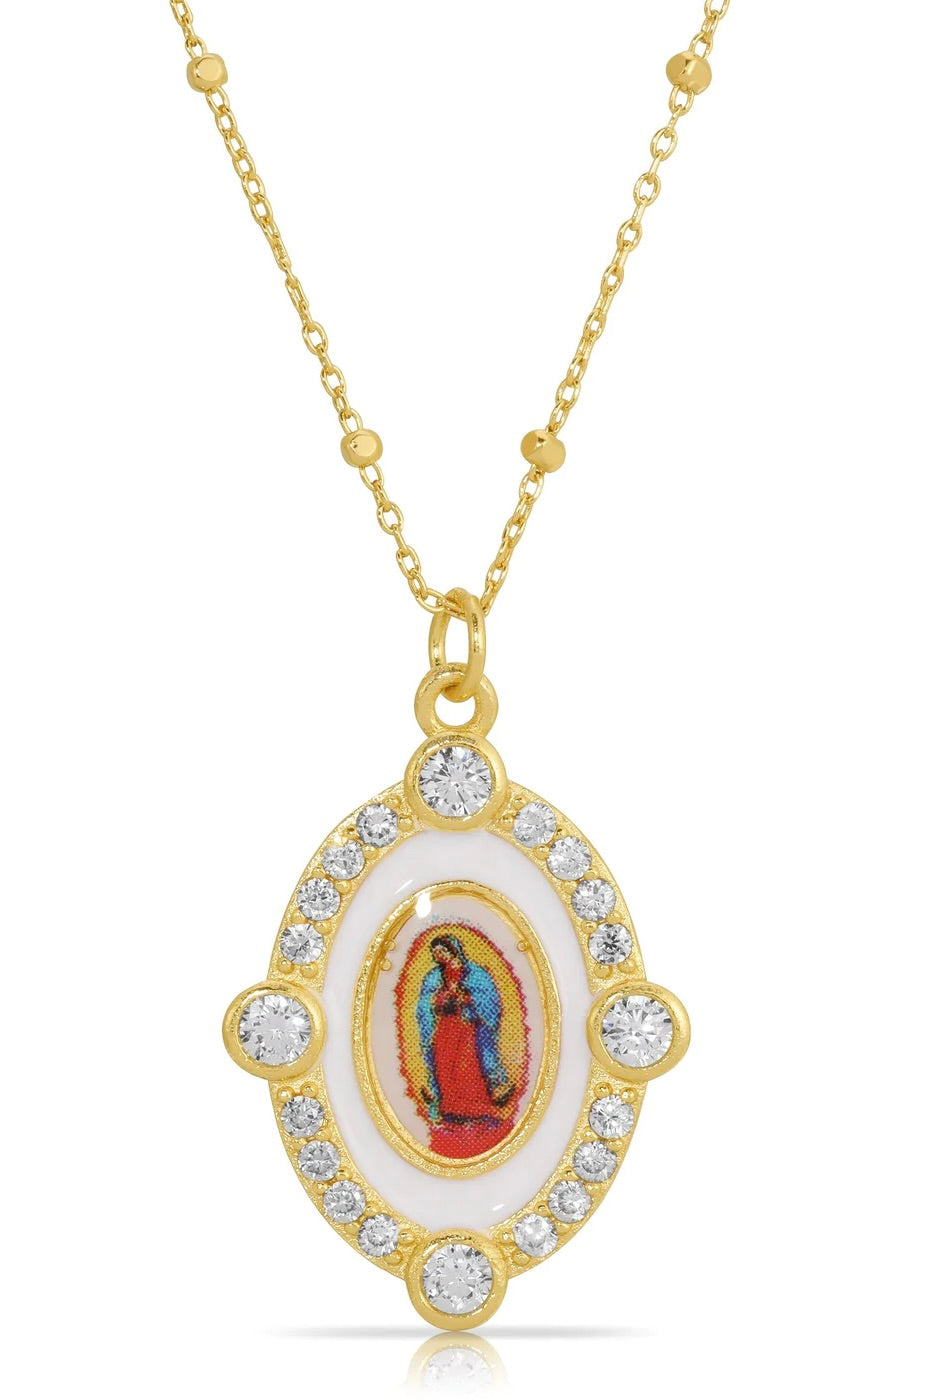 Our Lady Guadalupe Necklace